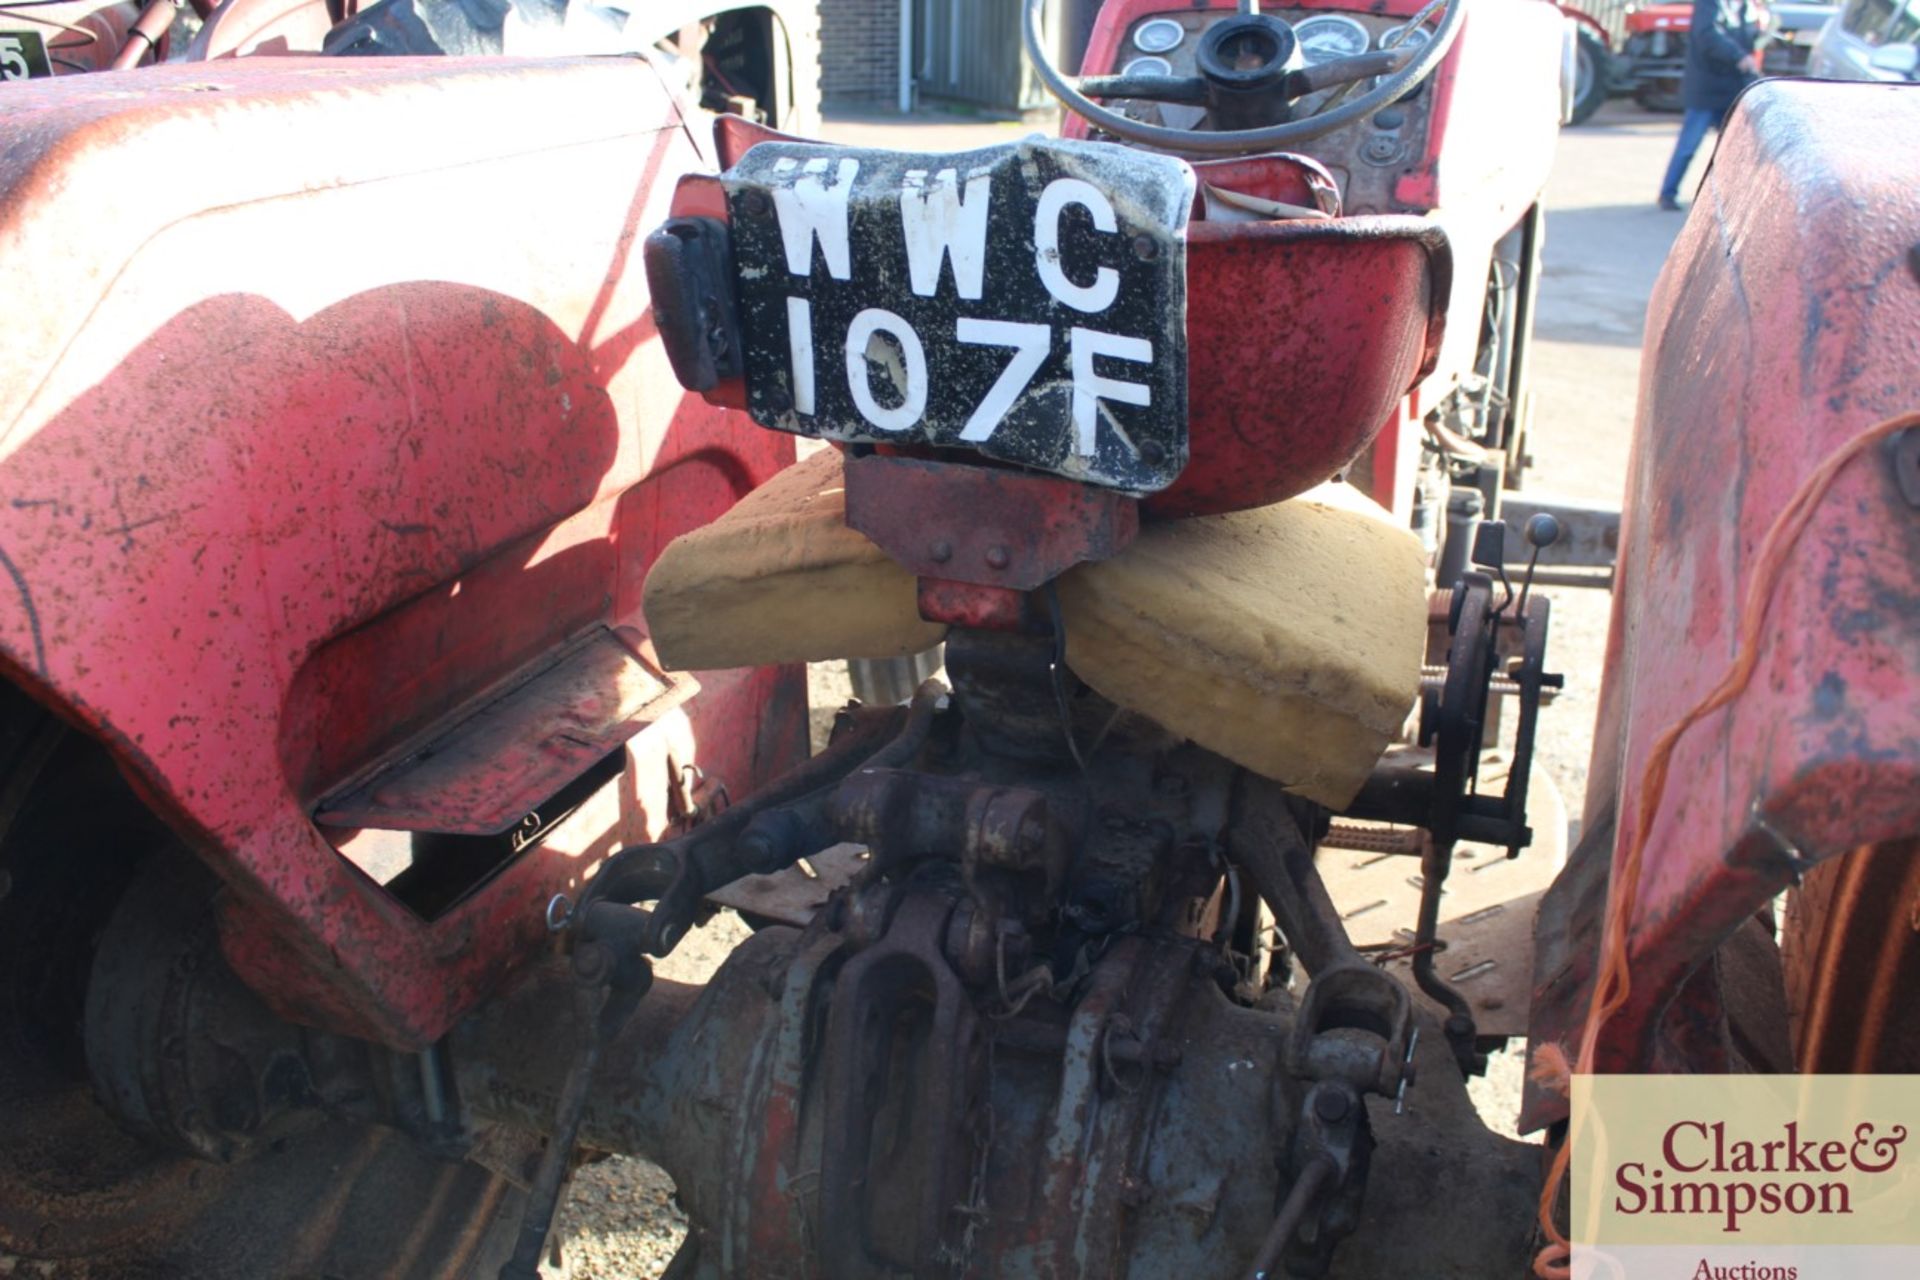 Massey Ferguson 165 2WD tractor. Serial number 545938. Registration WWC 107F. Date of first - Image 17 of 23